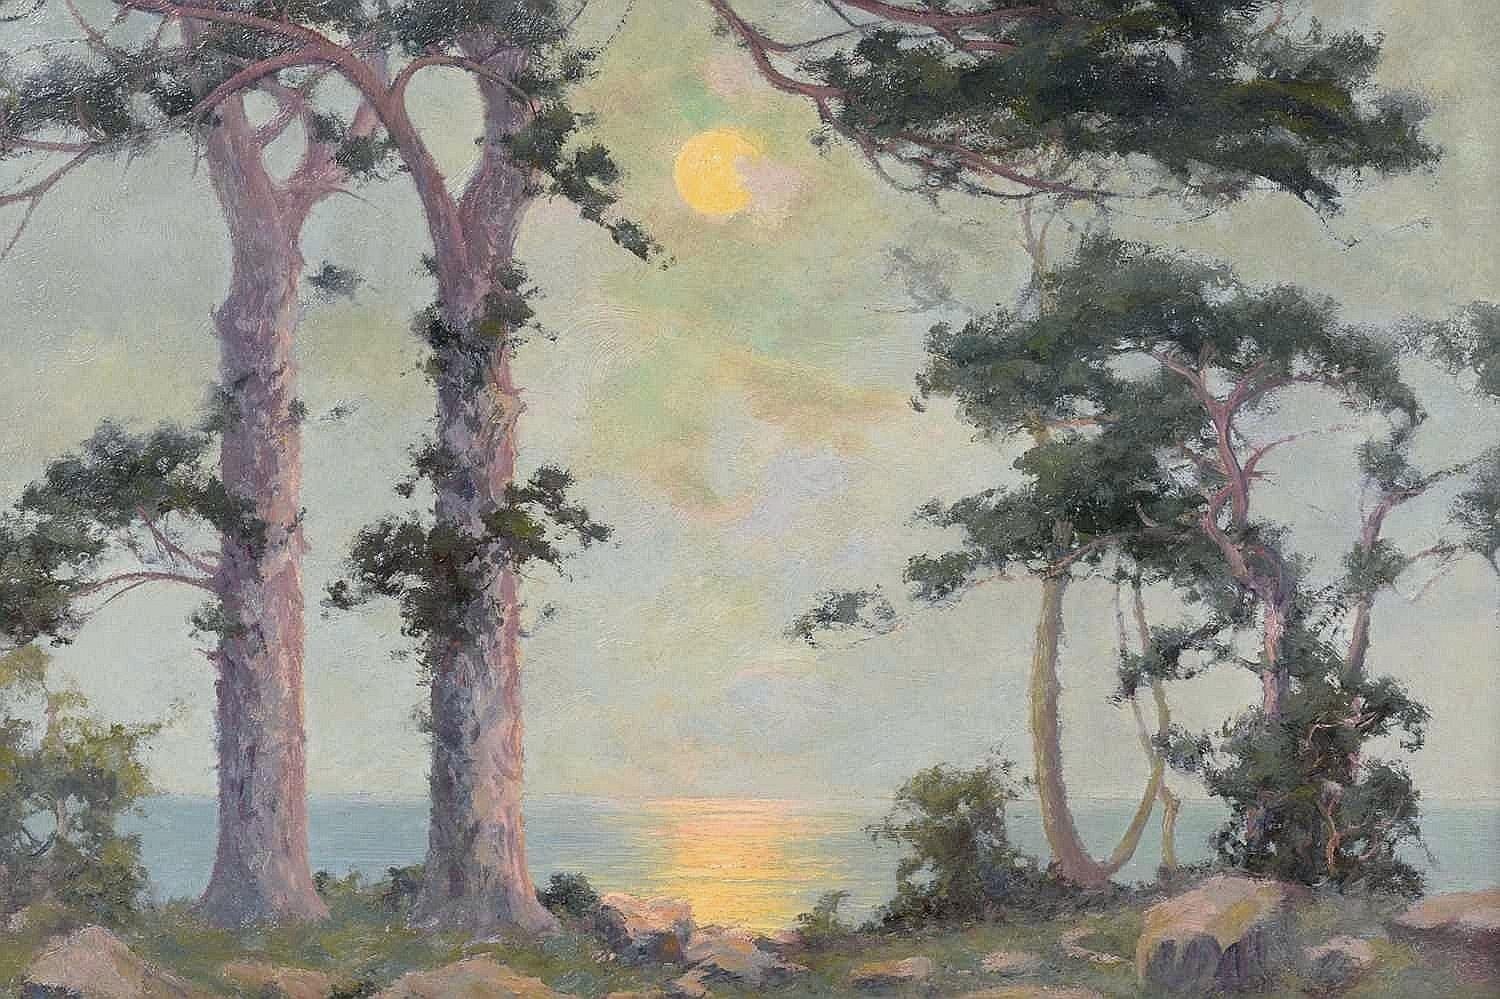 This very fine impressionist oil on panel painting by Alexander MacLean was exhibited at the Royal Academy, London in 1925.

Depicting the sun setting over a coastal landscape, the work is romantically titled 